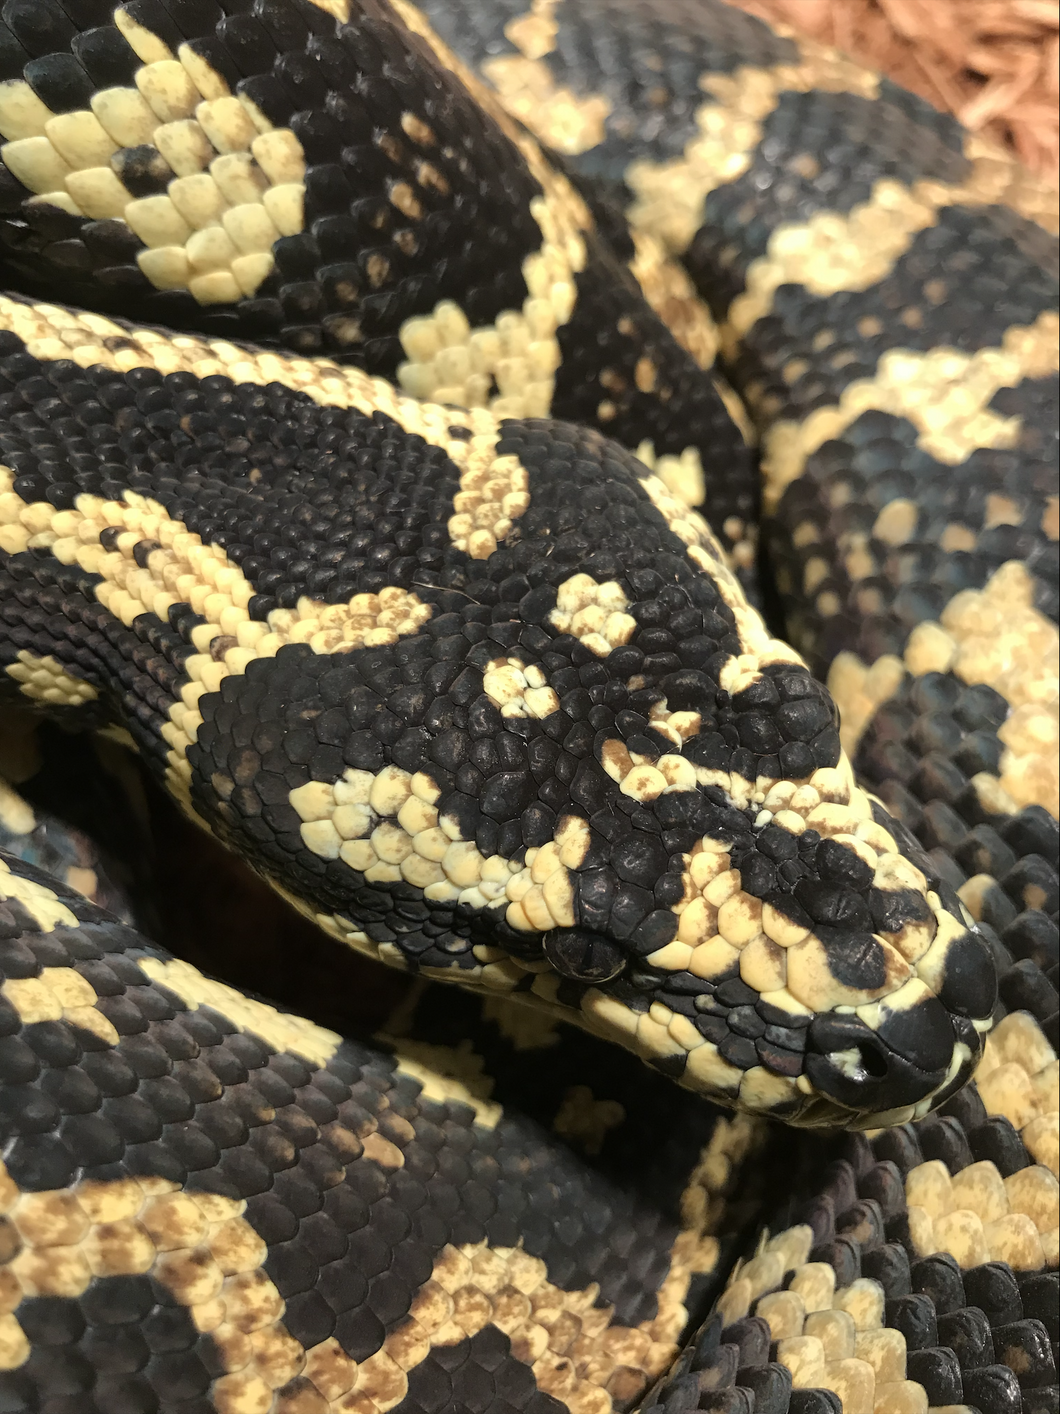 An Open Letter To People Who Kill Snakes, From A Proud Snake Owner